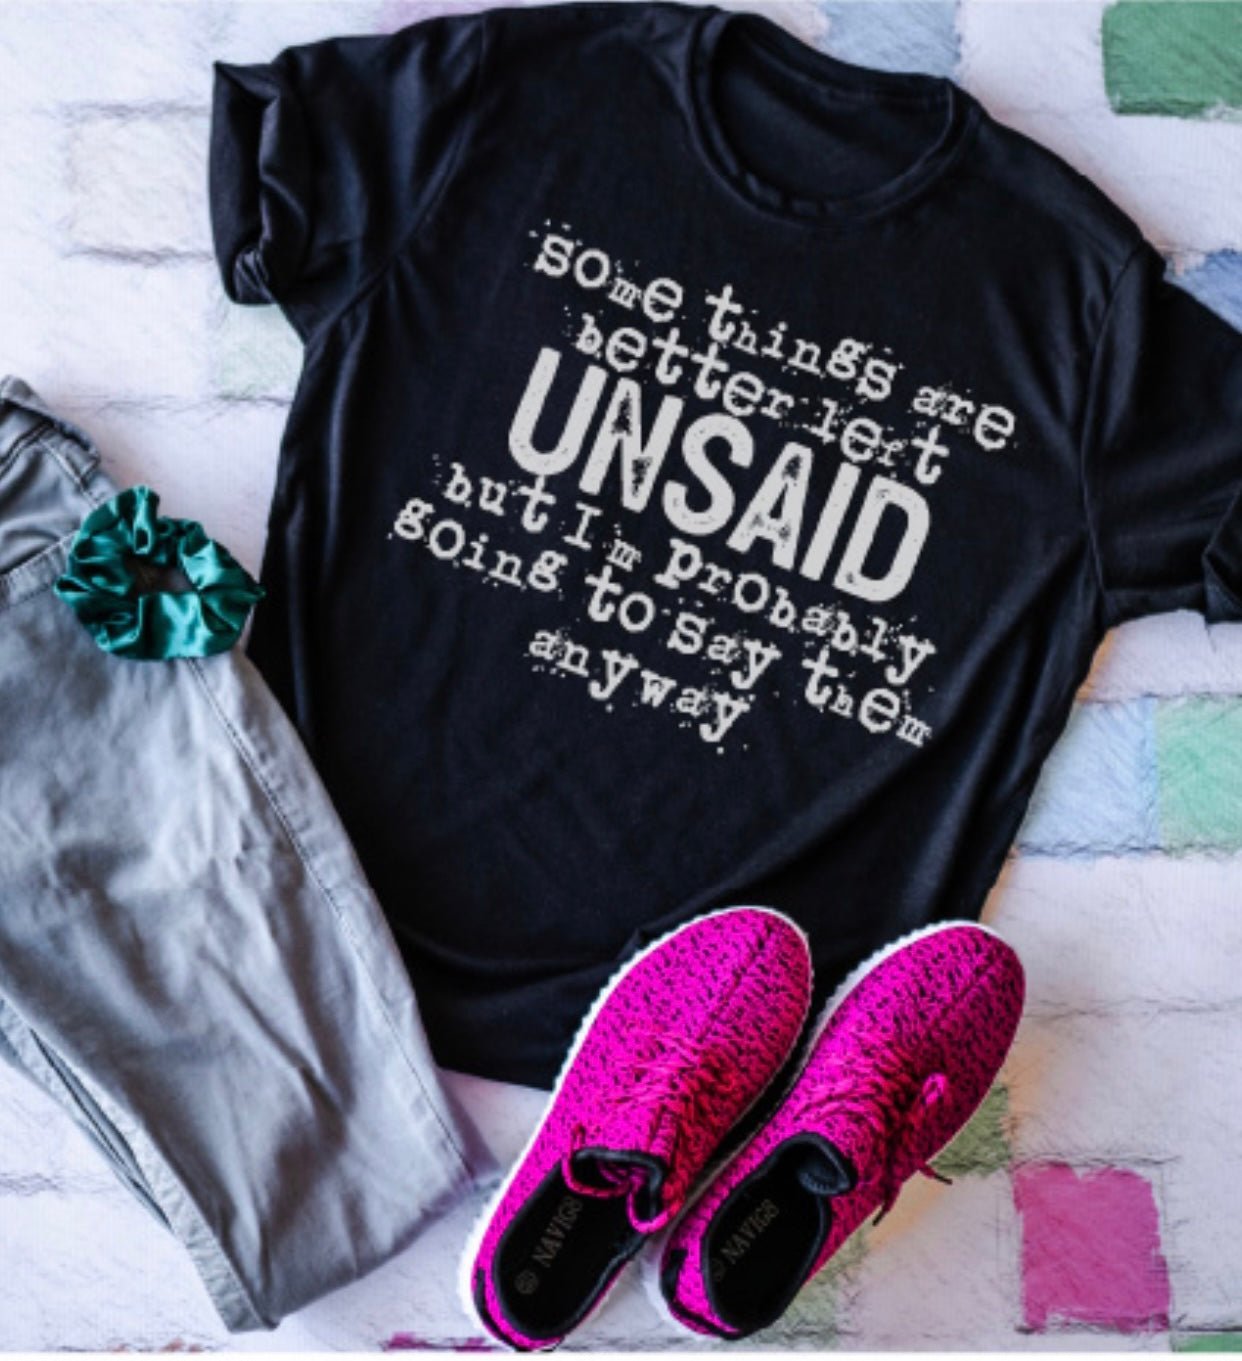 SOME THINGS ARE BETTER LEFT UNSAID...CUSTOM TSHIRT - WESTERN STYLIN'